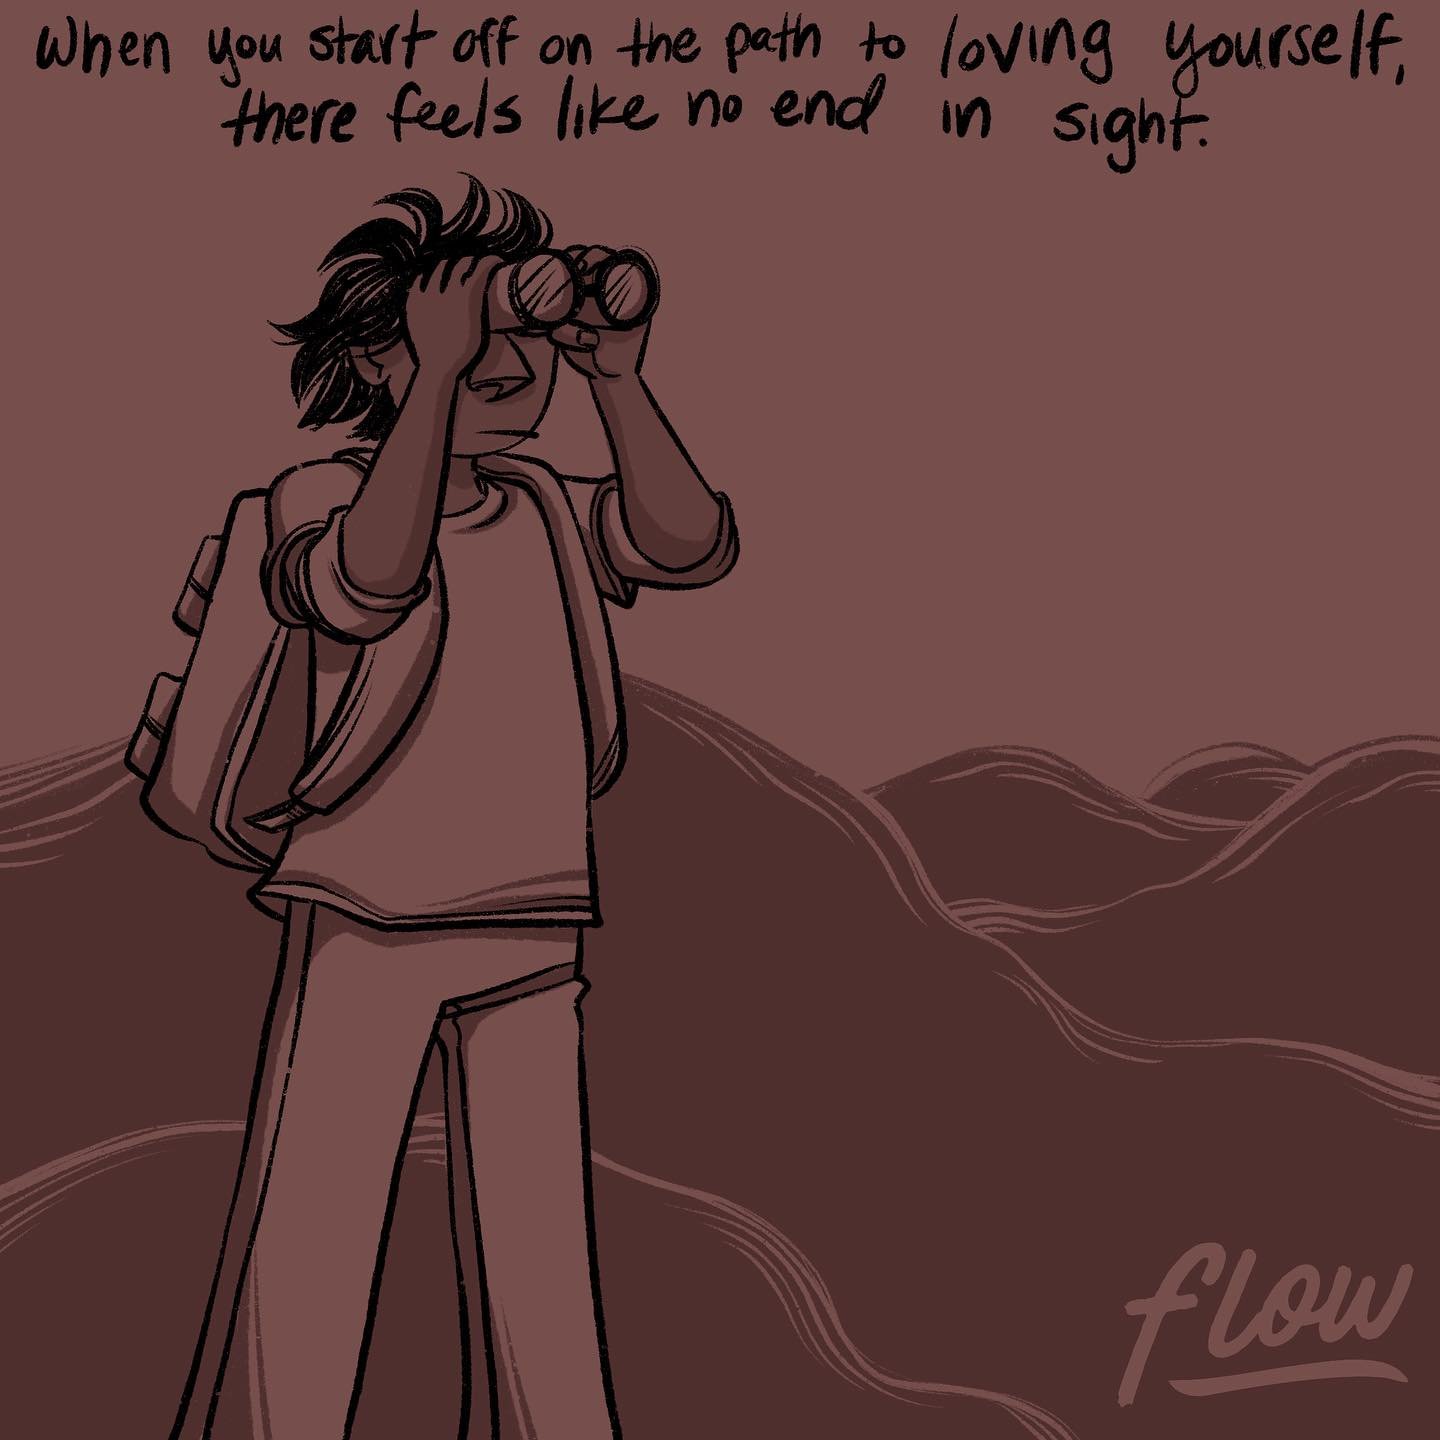 TRYing to learn to love yourself better means you&rsquo;re already partway there❣️ #mentalhealthmonday #flowlovesyou